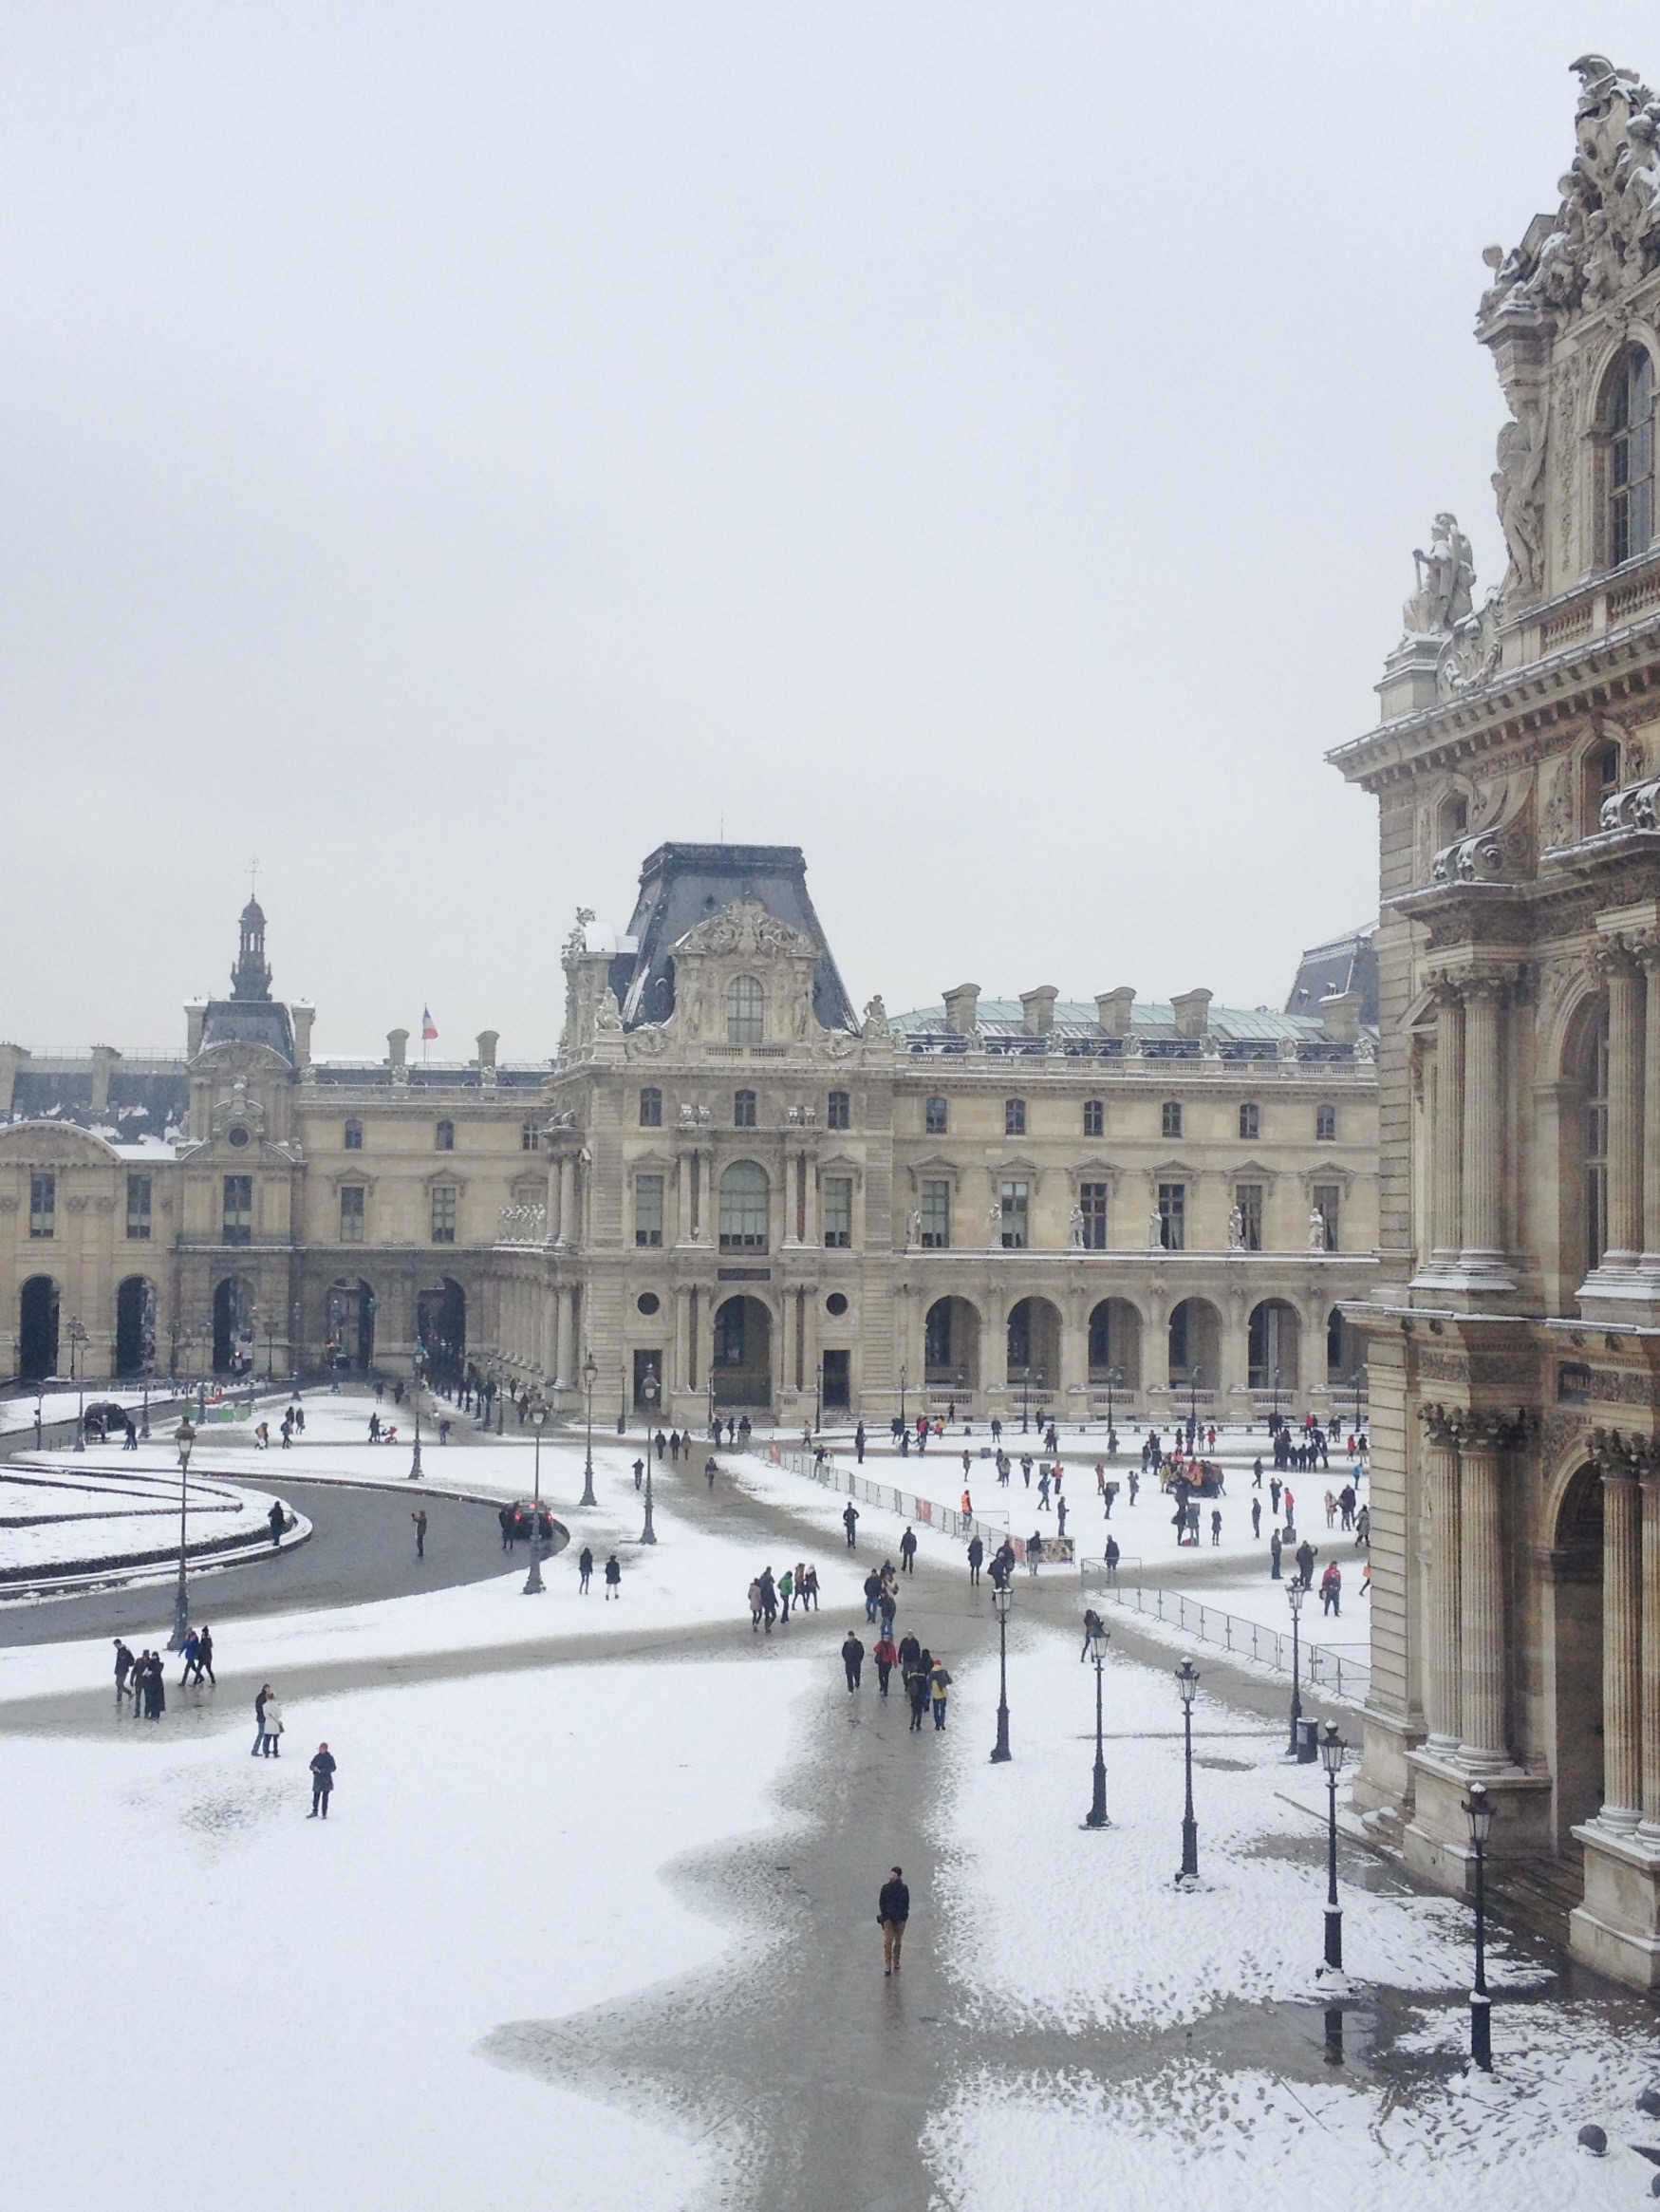 Snow at the Louvre Museum in a cold winter in Paris